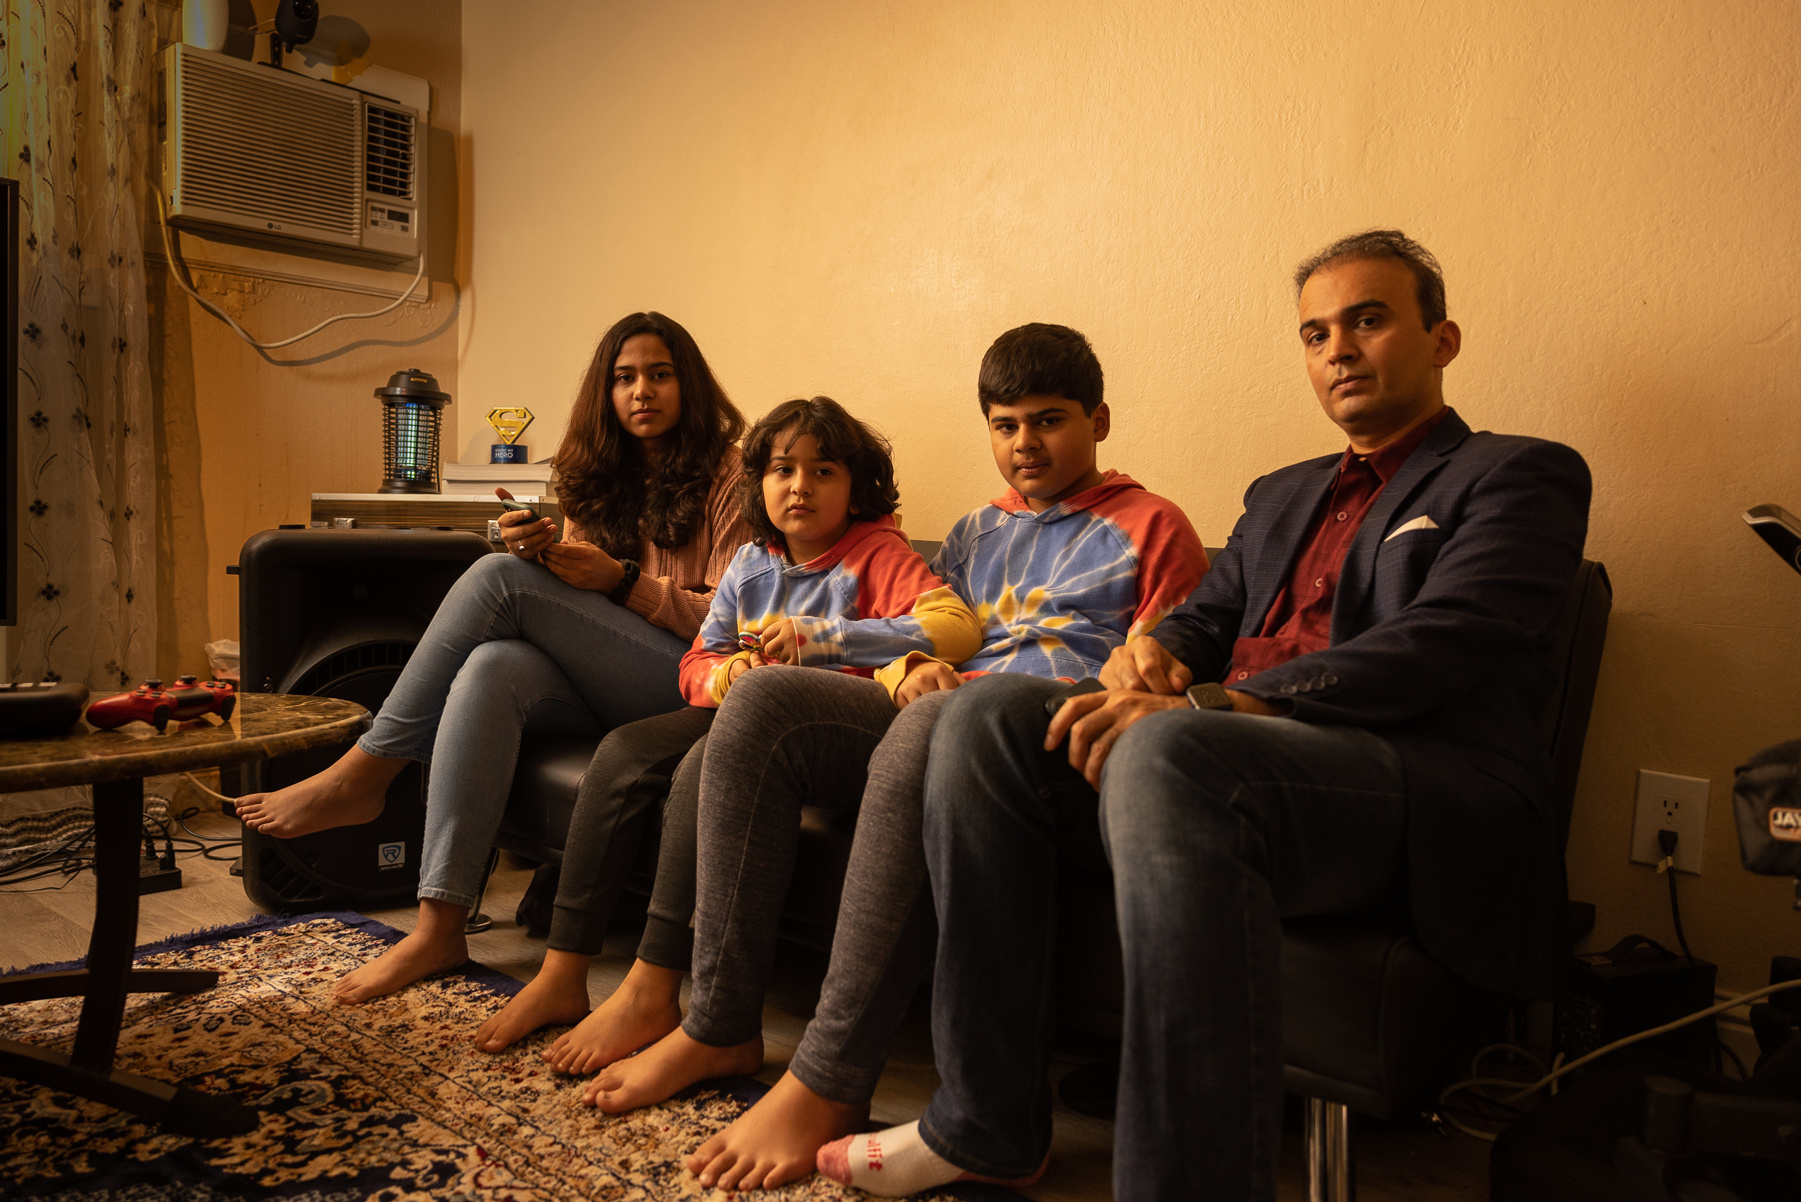 Rameen Aziz (far right) with children  Imaan, Abram, and Yousof (left to right, ages 13, 6, and 11).

Photo by Ryan Angel Meza for Sacramento Magazine, January 2022.